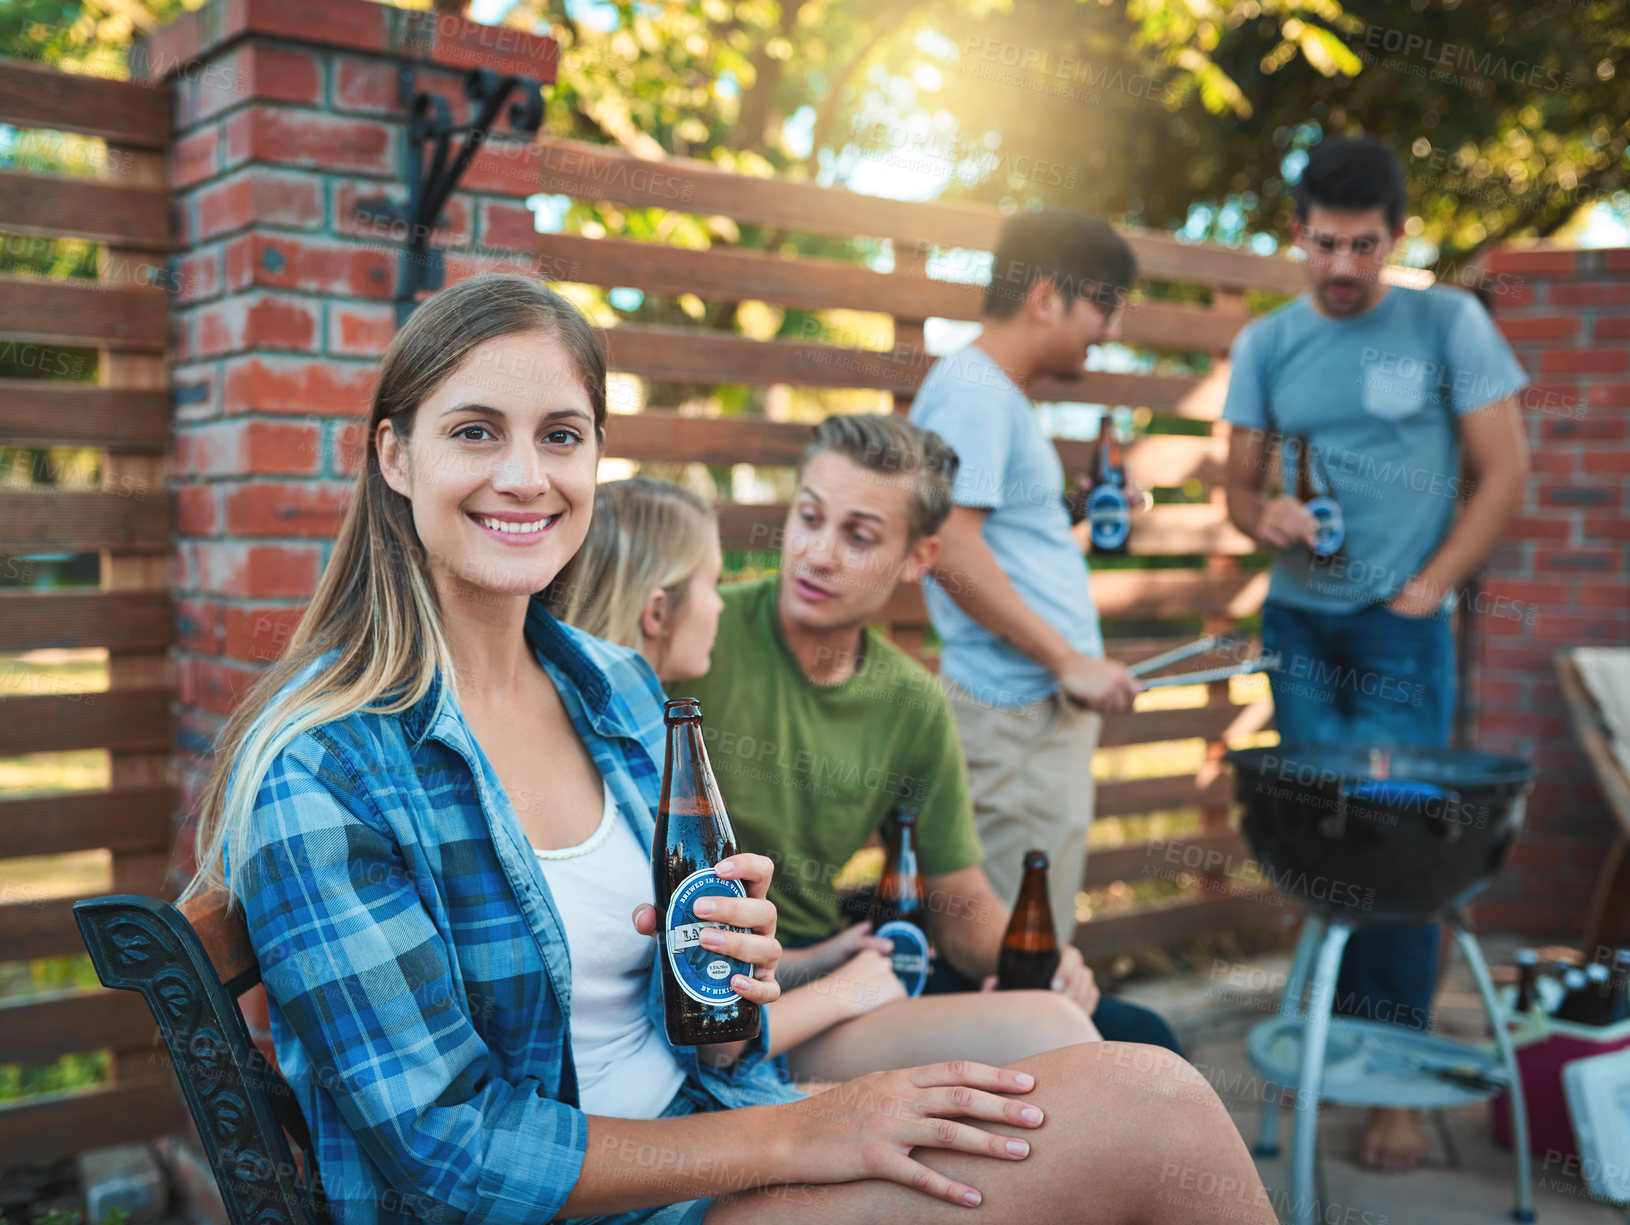 Buy stock photo Shot of a happy young woman enjoying a beer at a barbecue with her friends